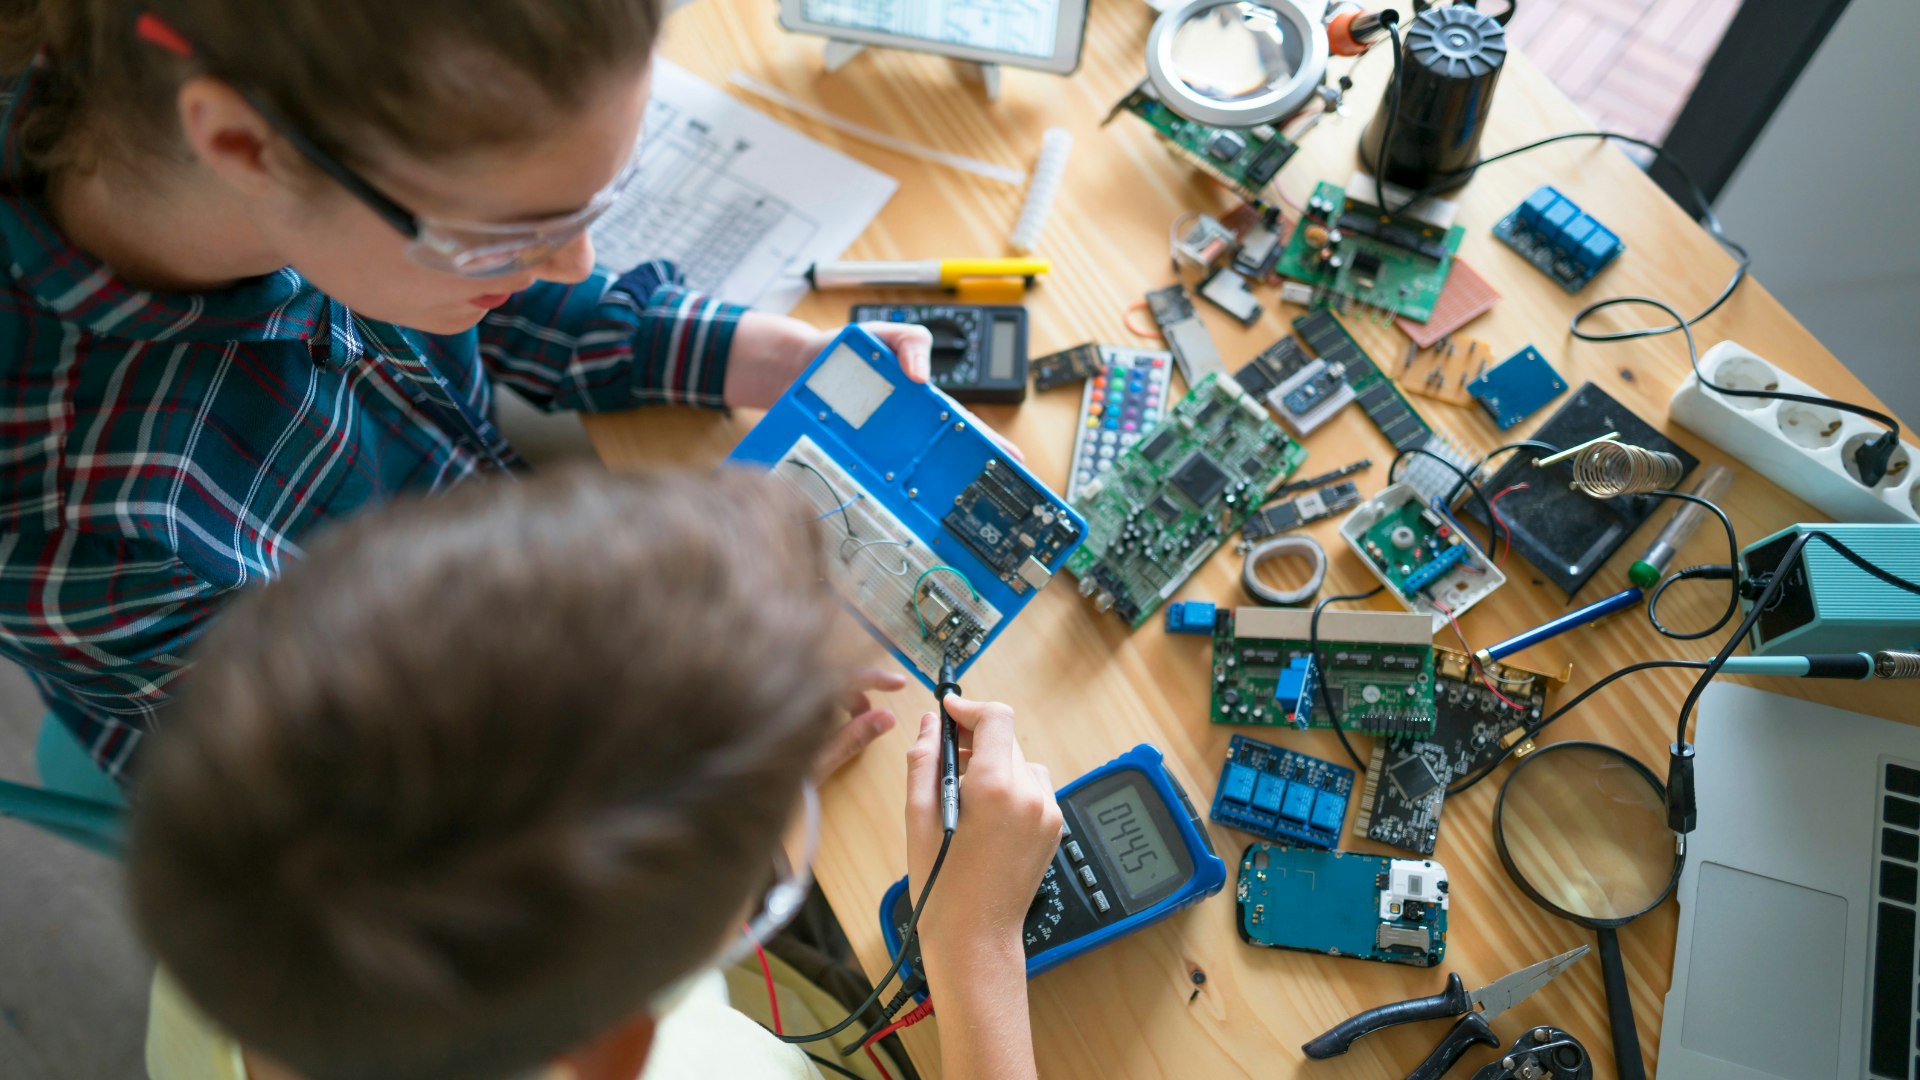 Students working with electronics